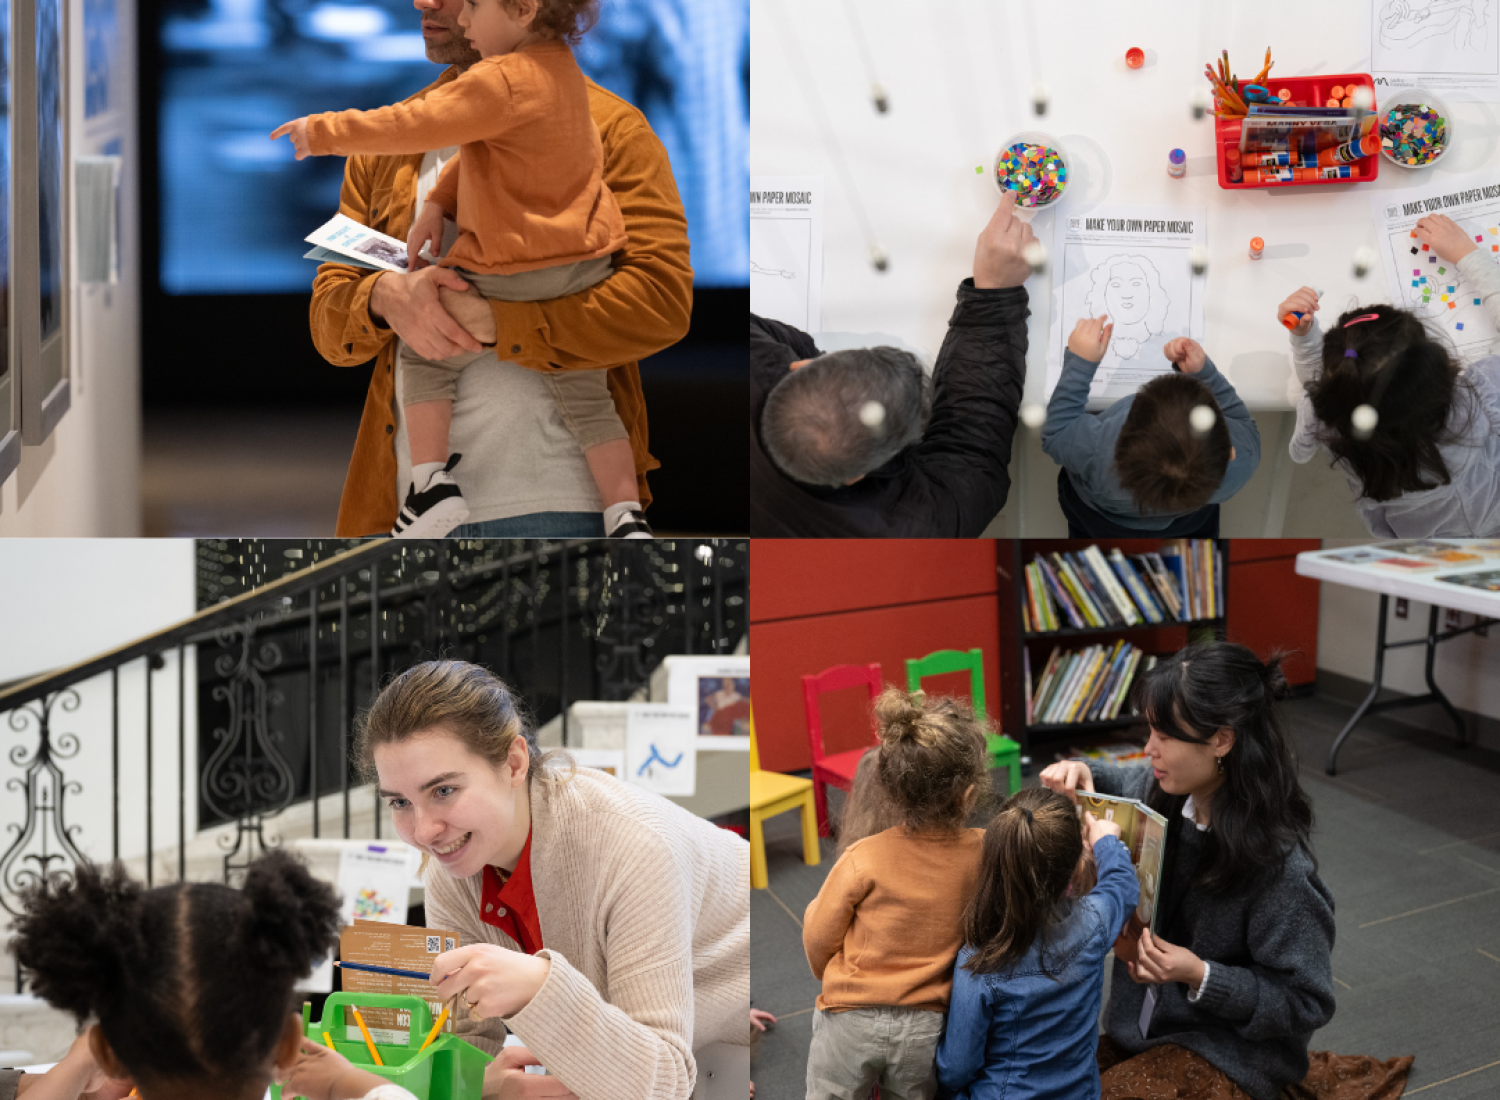 Photo collage: [Bottom Right] A man holds a toddler as they look at paintings. [Bottom Left] A woman smiles at a small child making art. Top Right] A man and two small children draw at a table. [Bottom Right] An adult reads a book to a group of toddlers. [